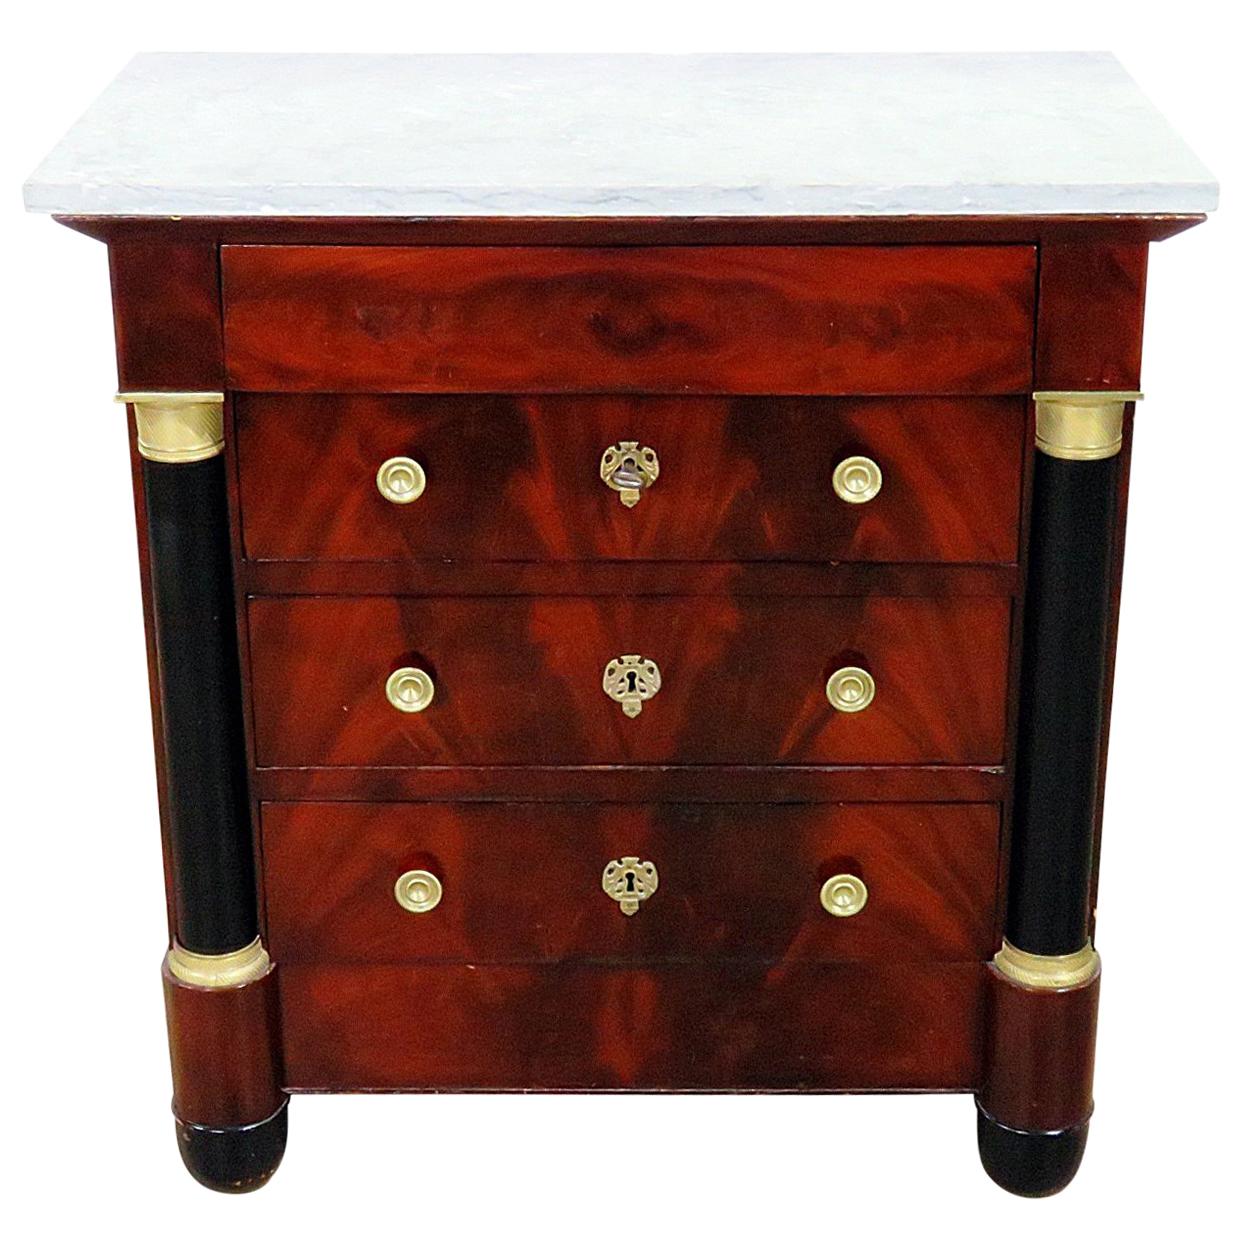 French Empire Style Marble-Top Dresser